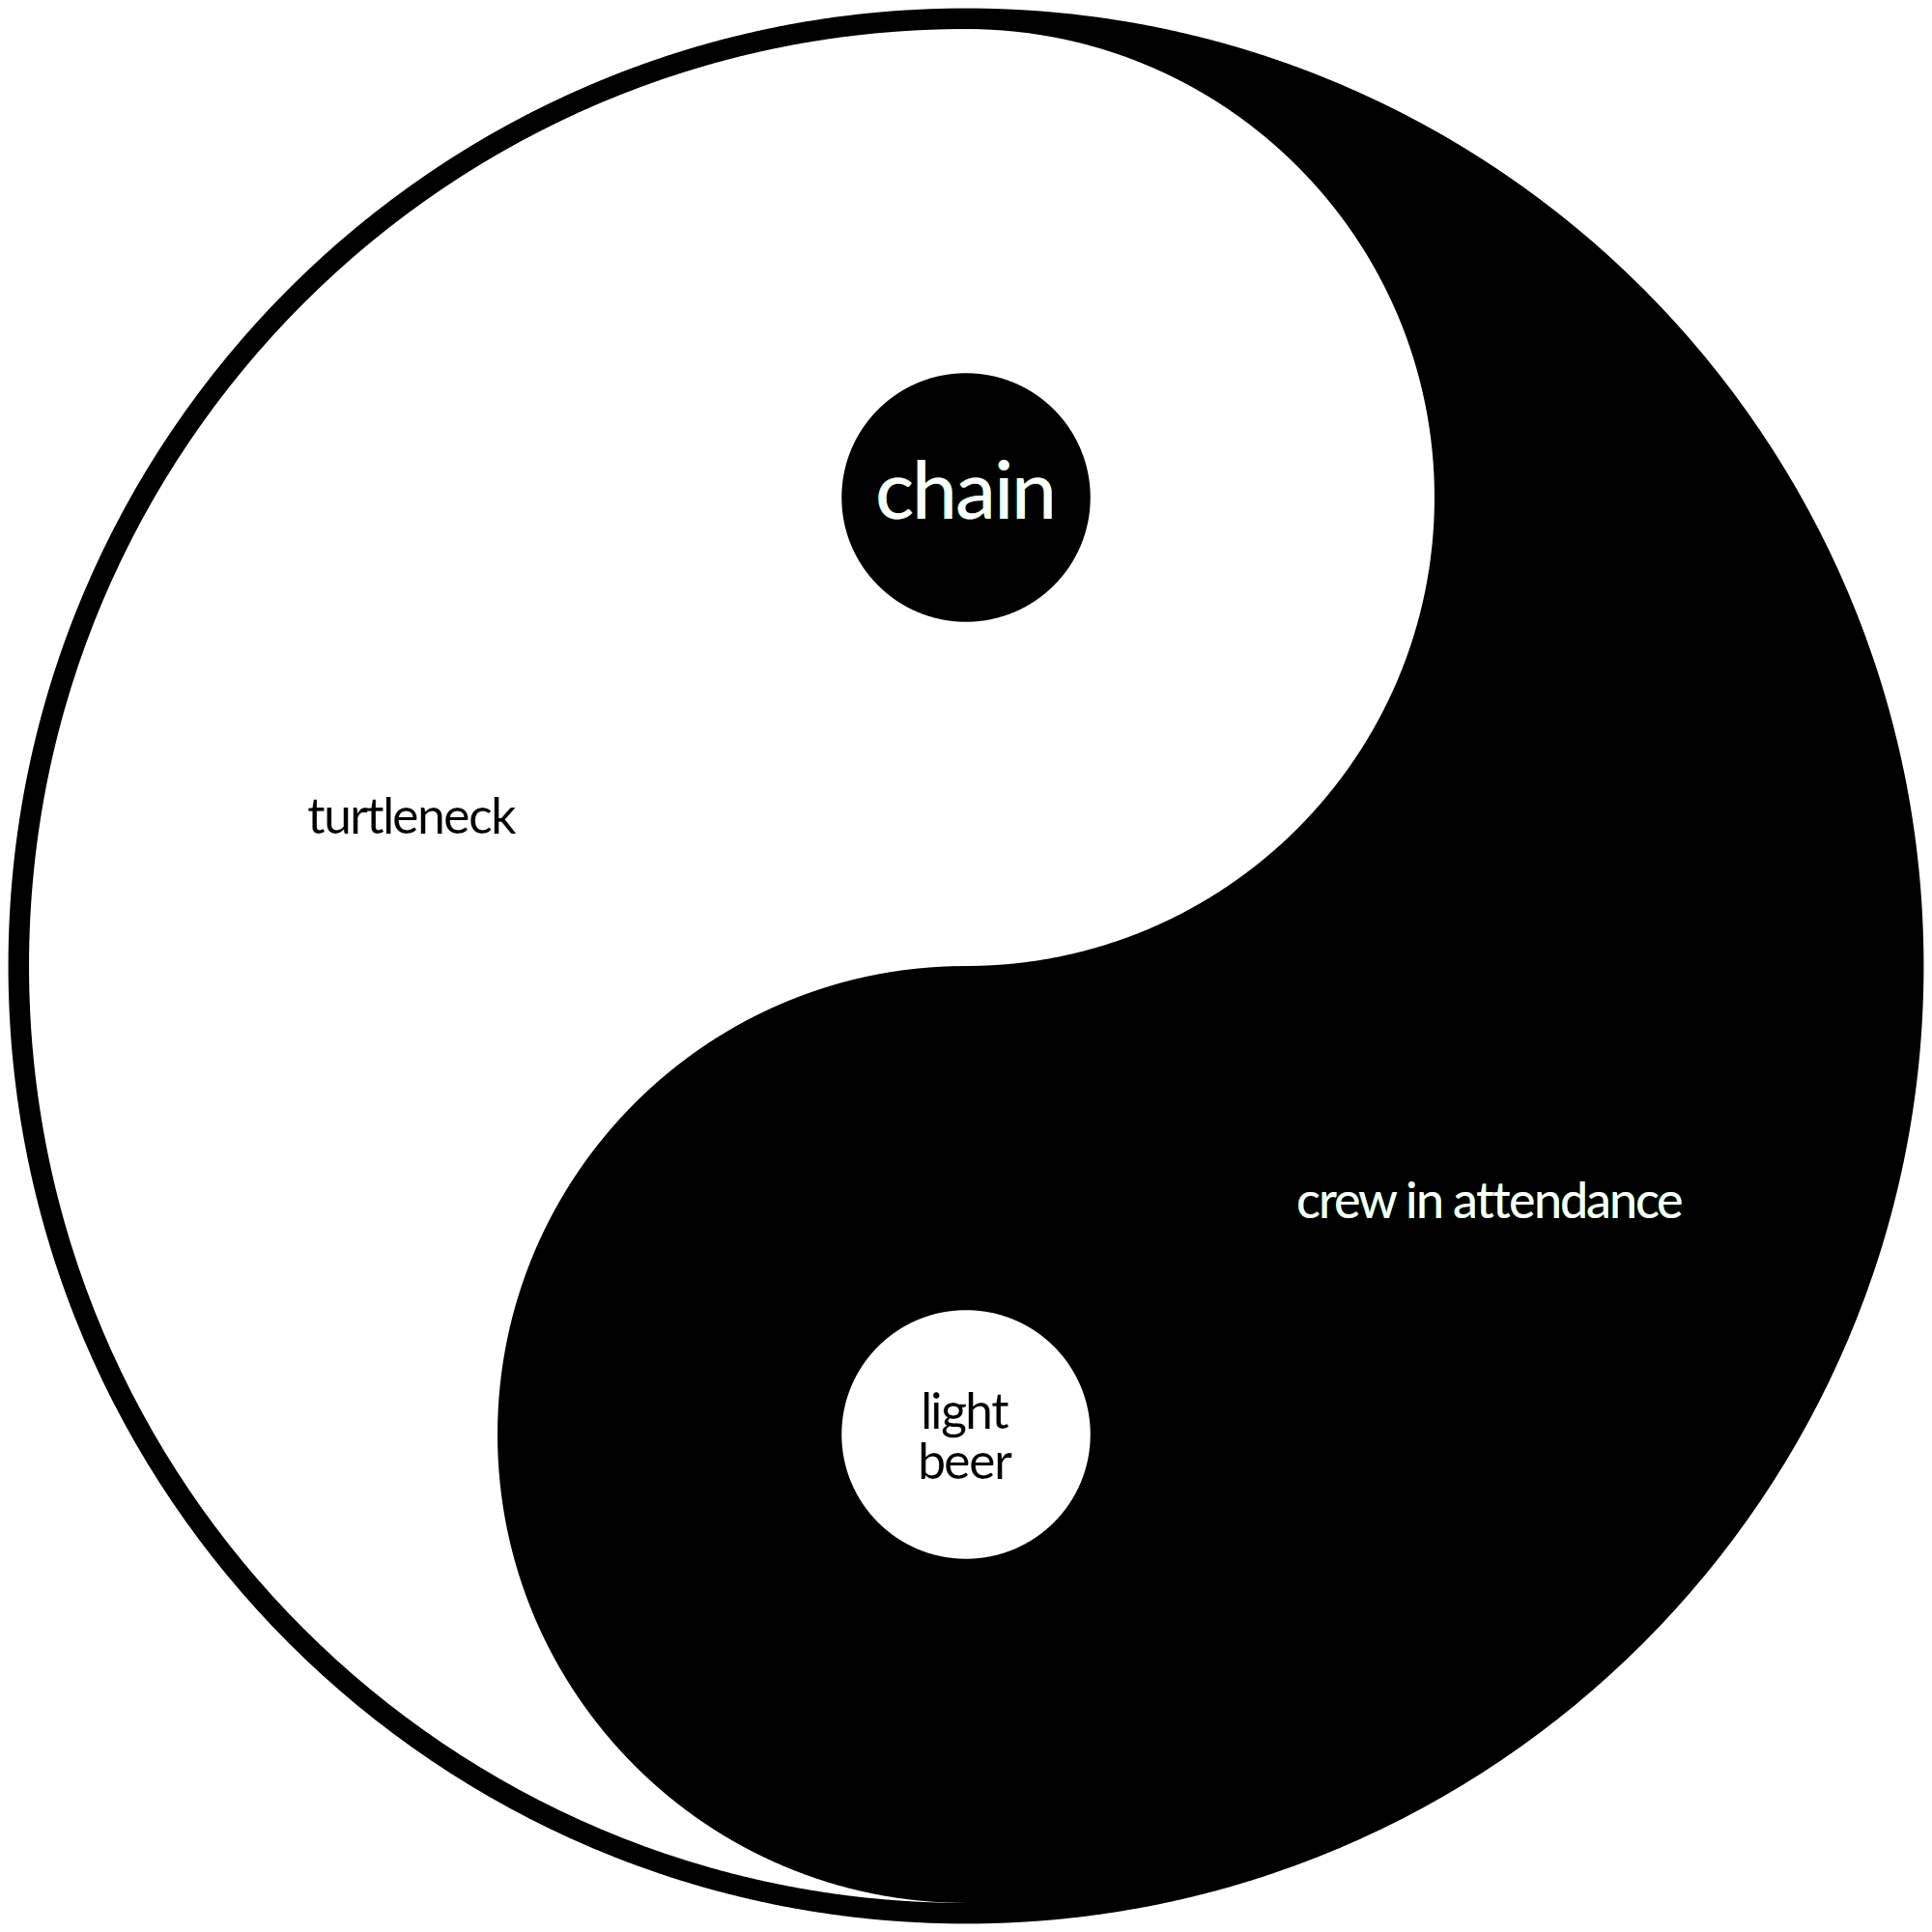 a yinyang depicting the mixture of cool and uncool aspects